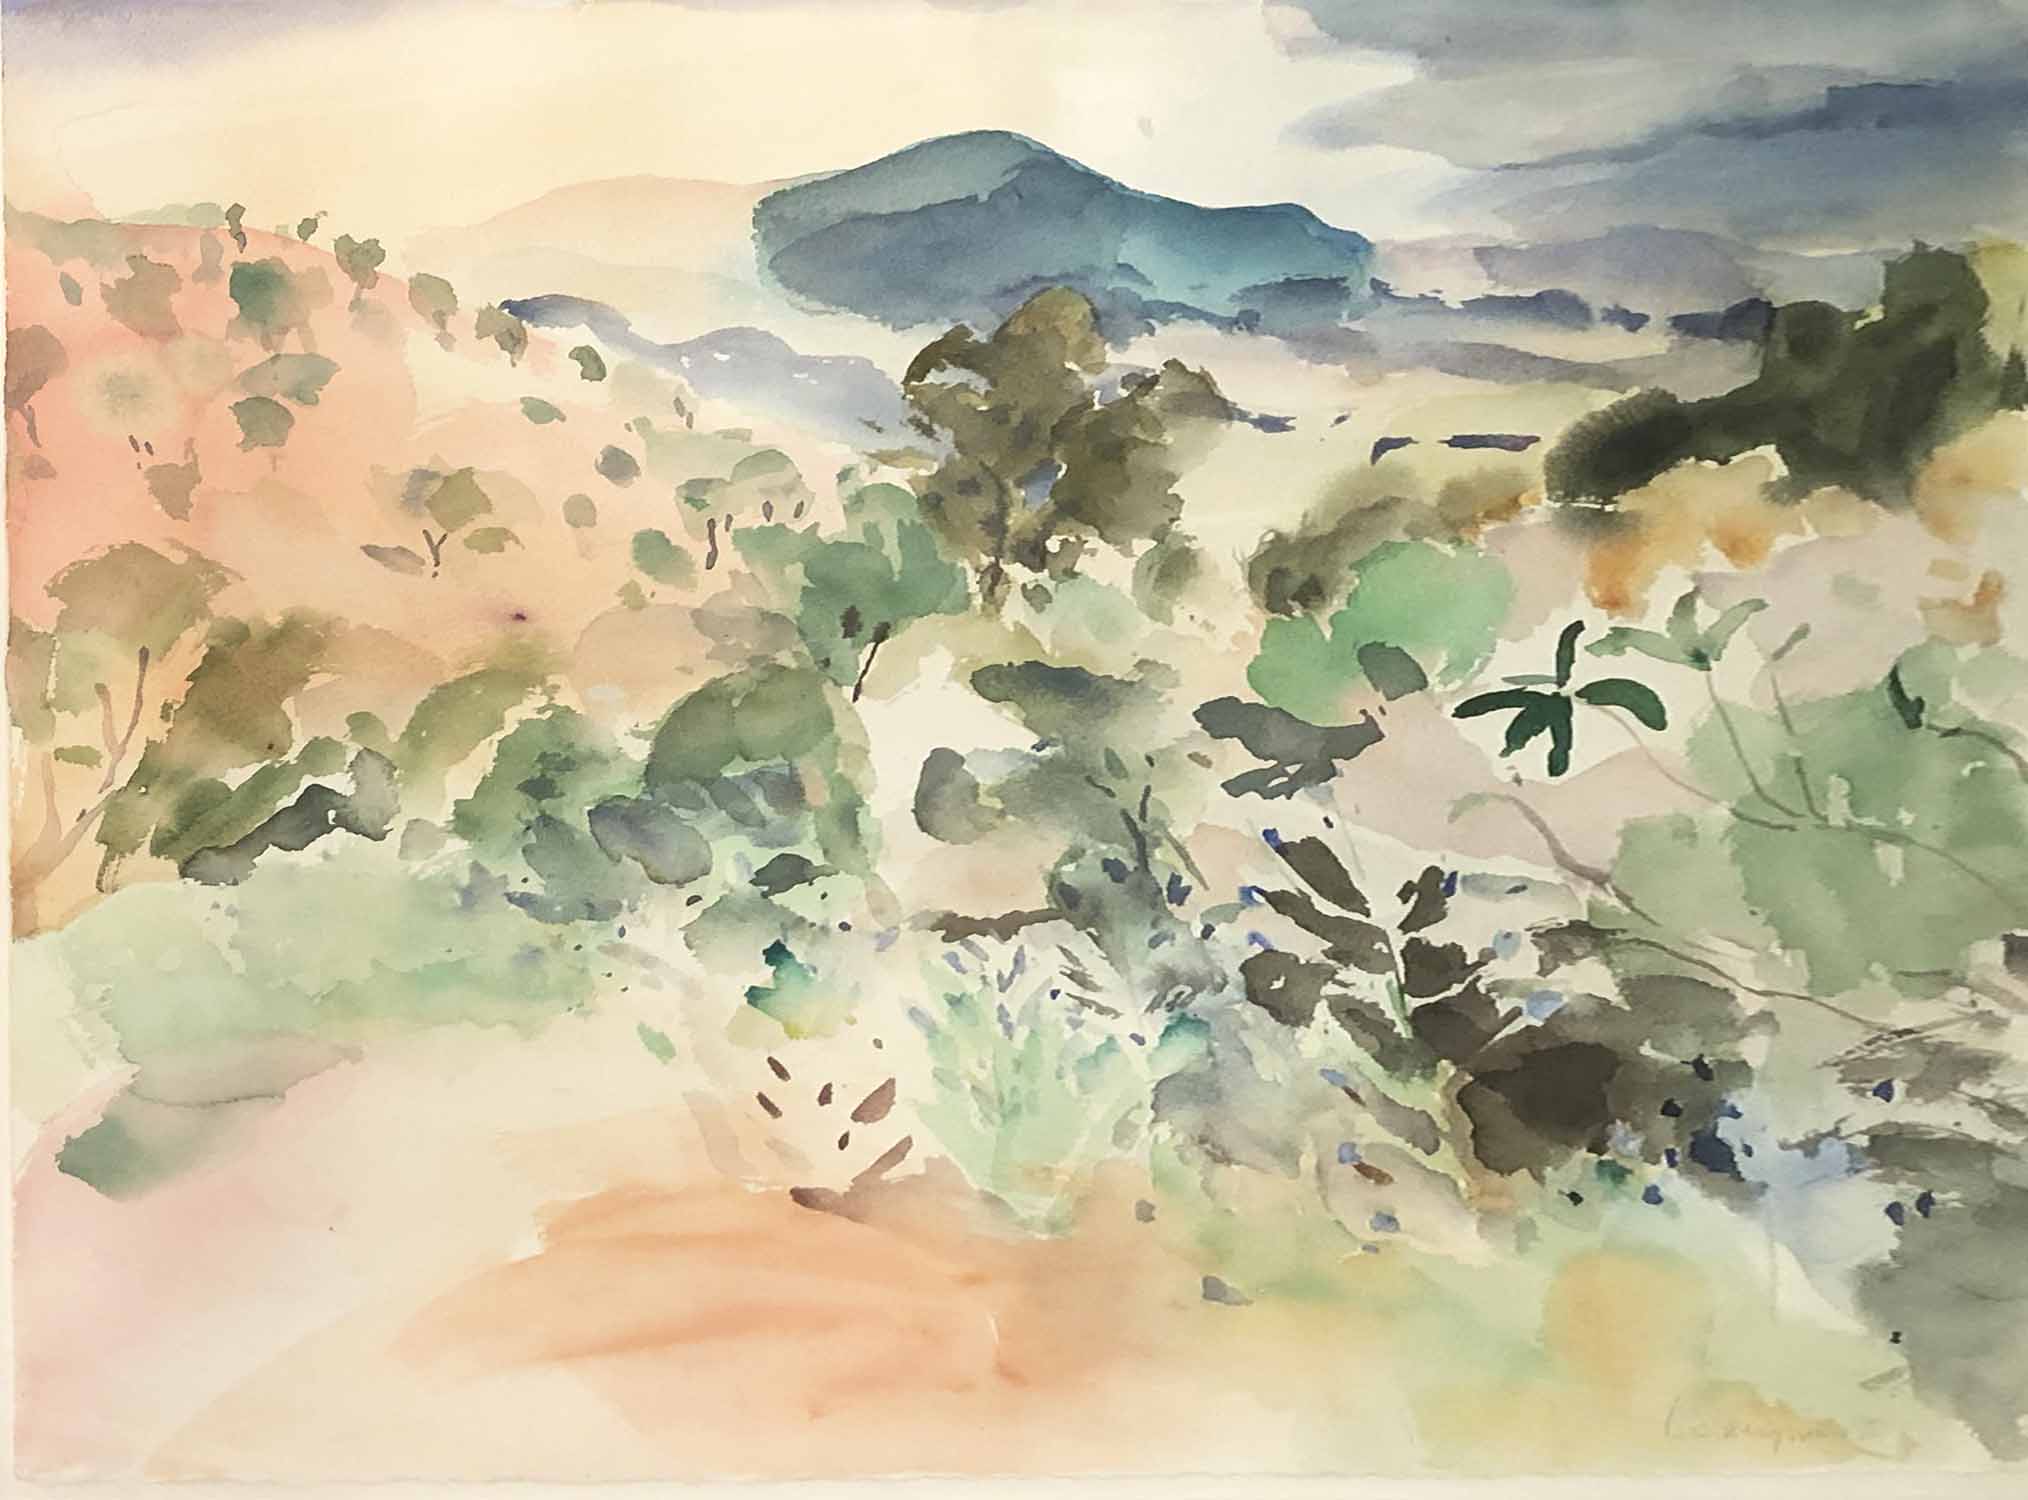 LIZ KEYWORTH 'Landscape in Provence', watercolour, signed and dated '88, 56cm x 76cm.